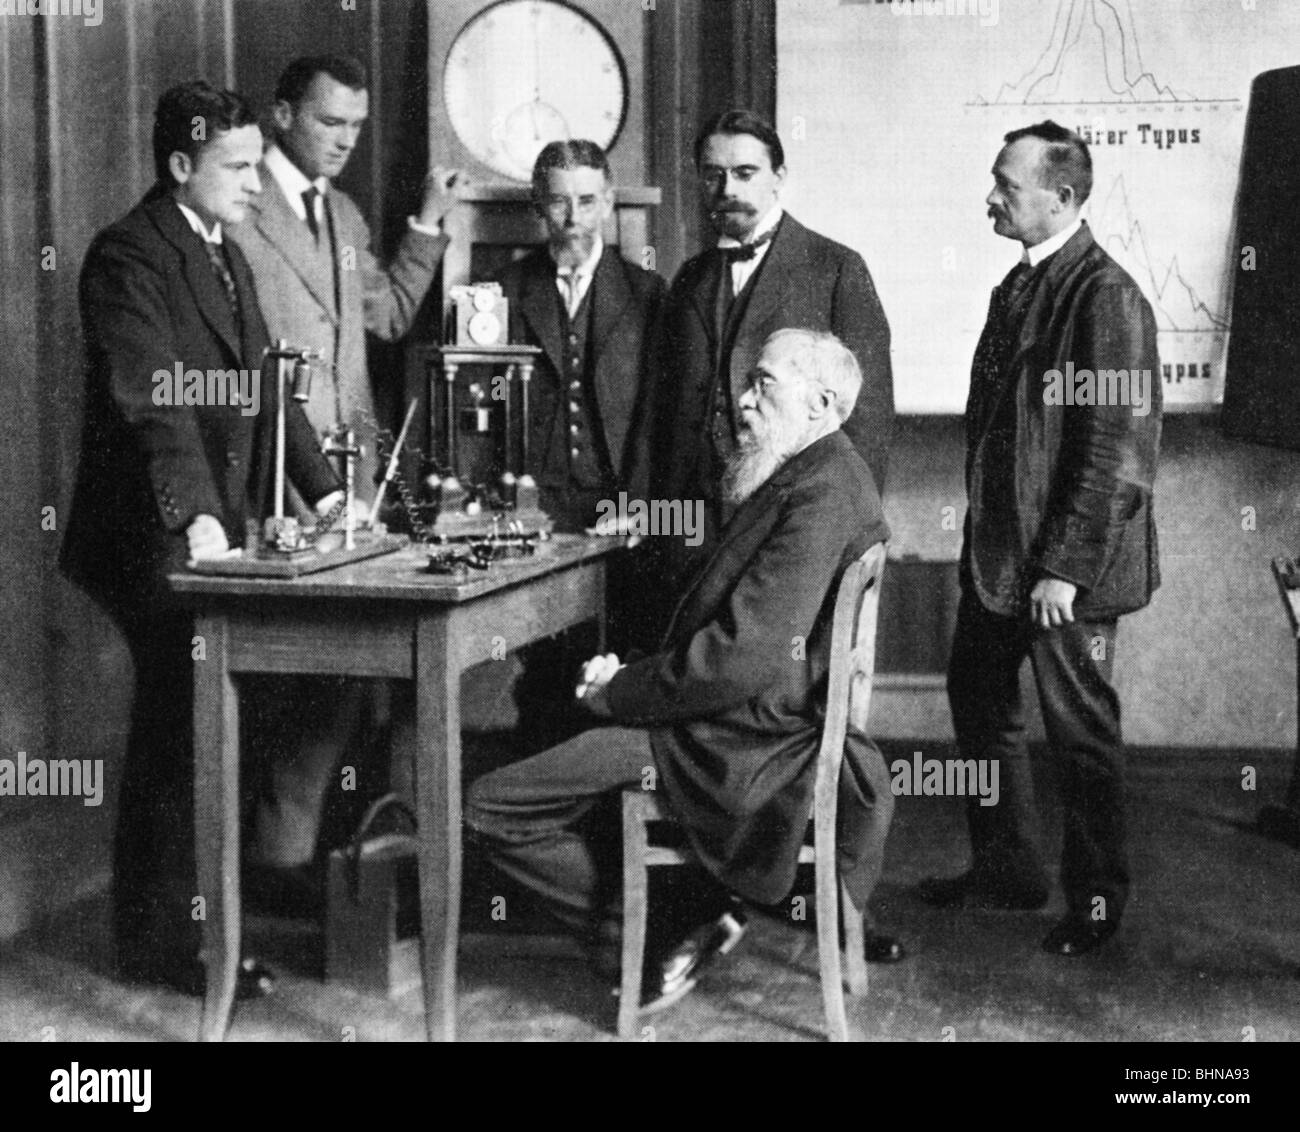 Wundt, Wilhelm, 16.8.1832 - 31.8.1920, German philosopher and psychologist, half length, with his colleagues: Friedrich Sander, Otto Klemm, Ottmar Dittrich, Wilhelm Wirth and the assistant Hartmann, circa 1908, Stock Photo